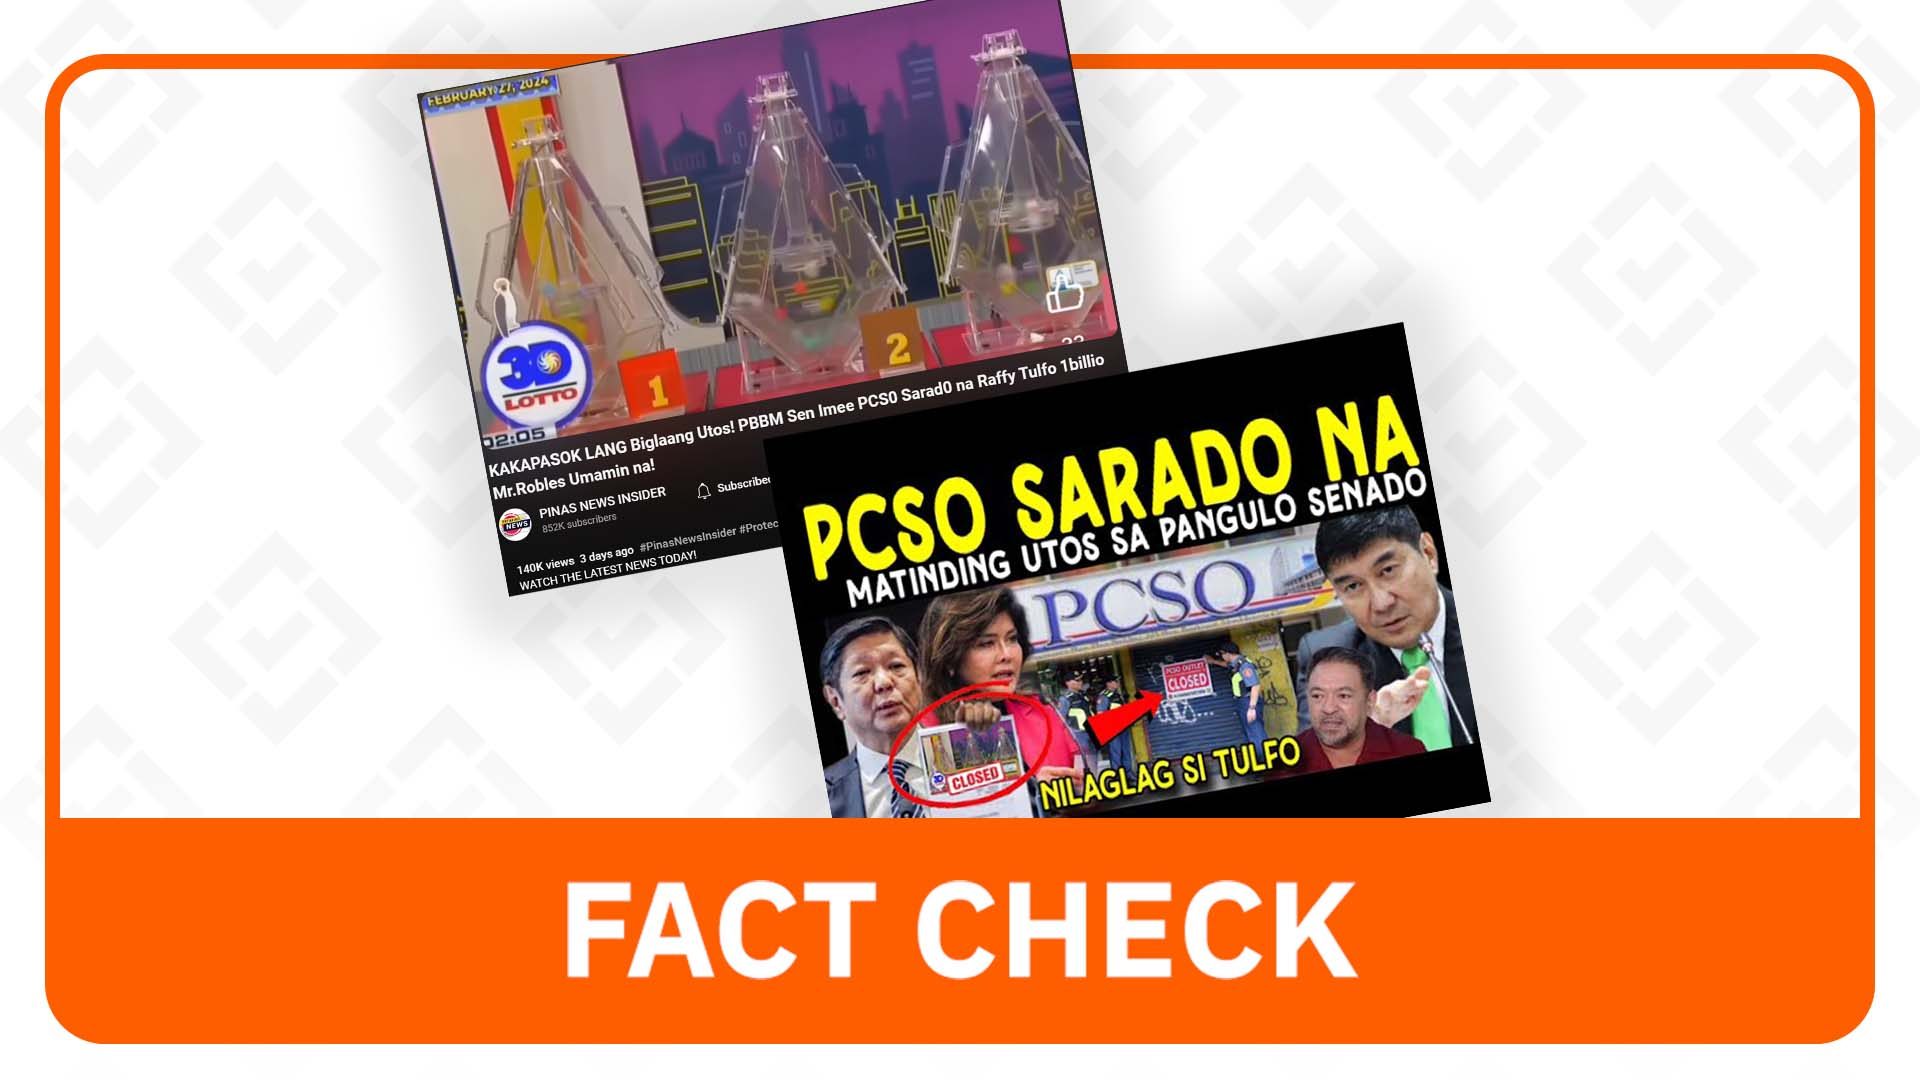 FACT CHECK: No Marcos order to shut down PCSO